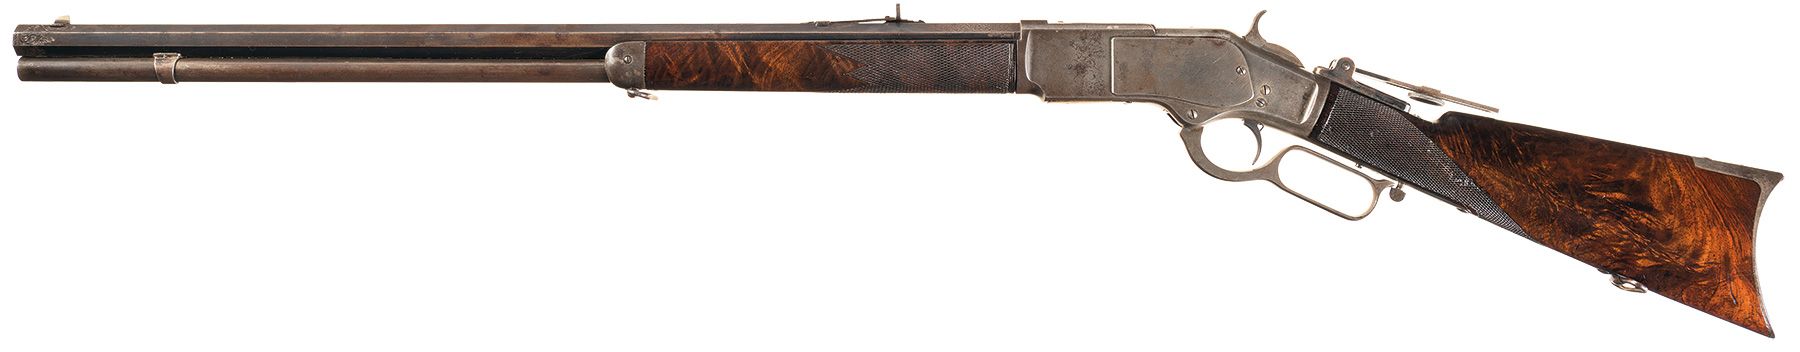 Winchester "One of One Hundred" M1873 rifle